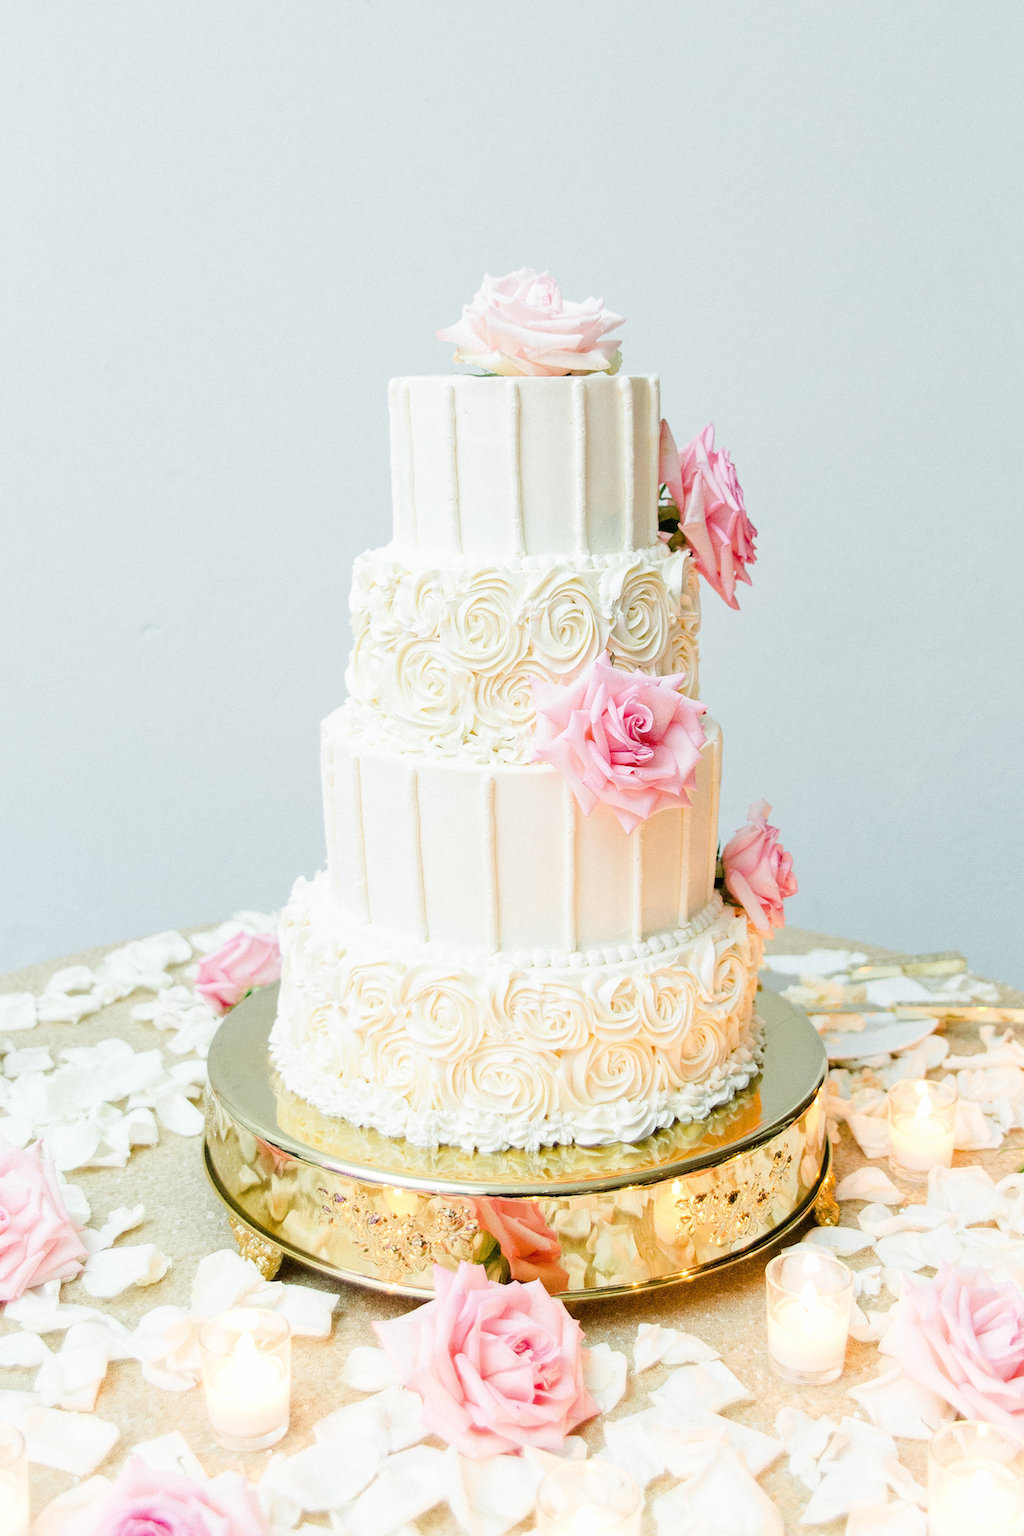 Elegant, Classic Four Tier Round White Wedding Cake with Alternating Rose and Vertical Icing and Pink Roses and Ivory Rose Petals on Gold Cake Stand | Wedding Cake Baker The Vinoy Renaissance